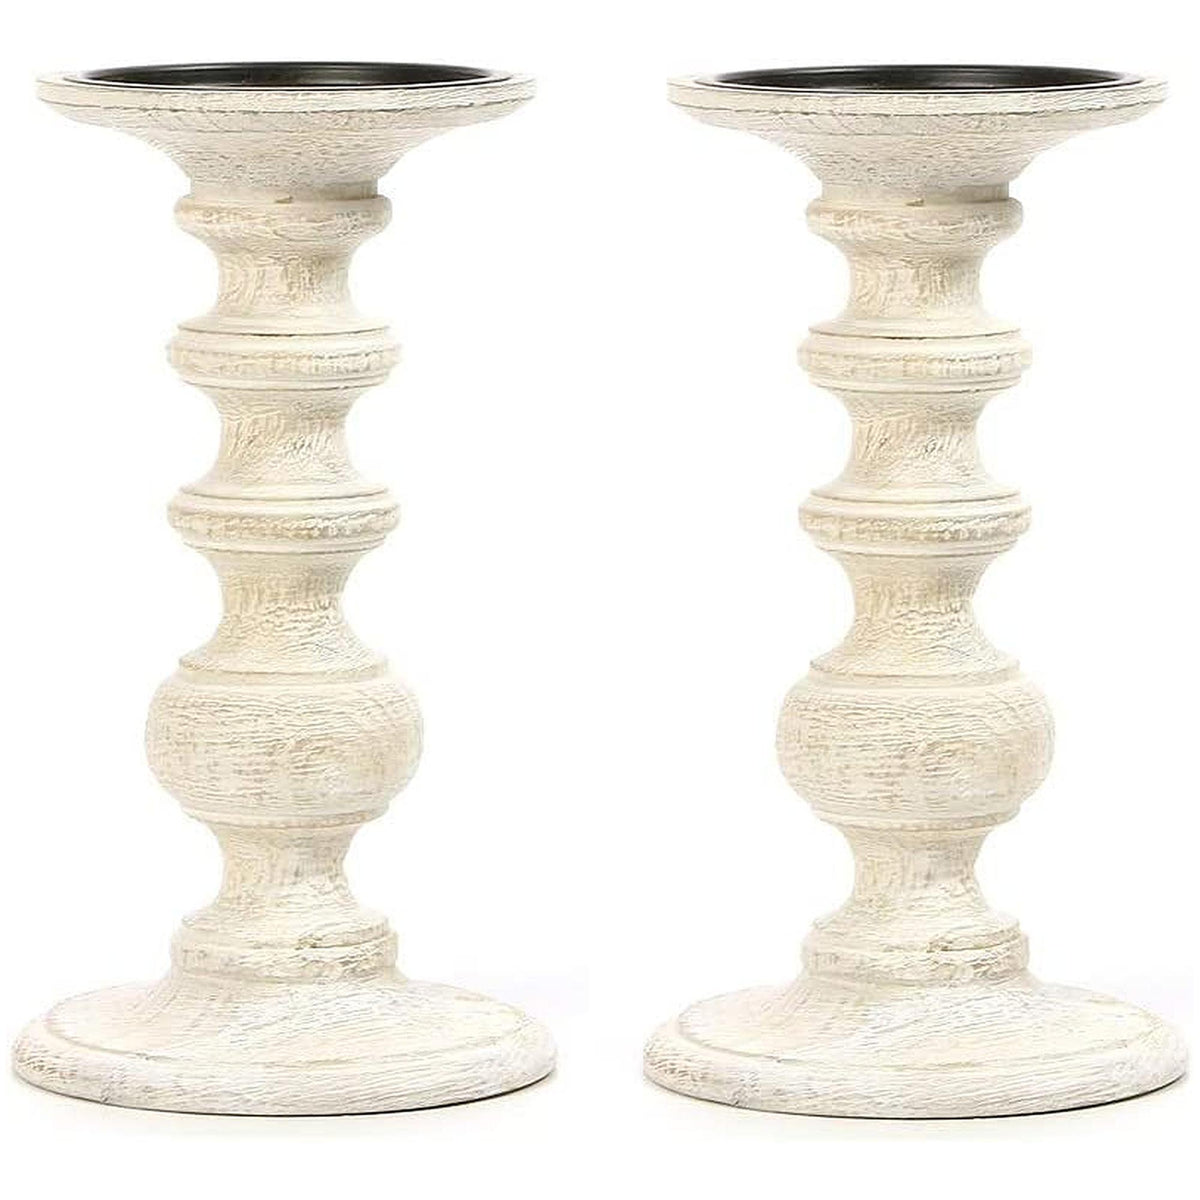 HOSLEY®  Wood Pillar Candle Holder, White Color, Set of 2, 9 inches High each